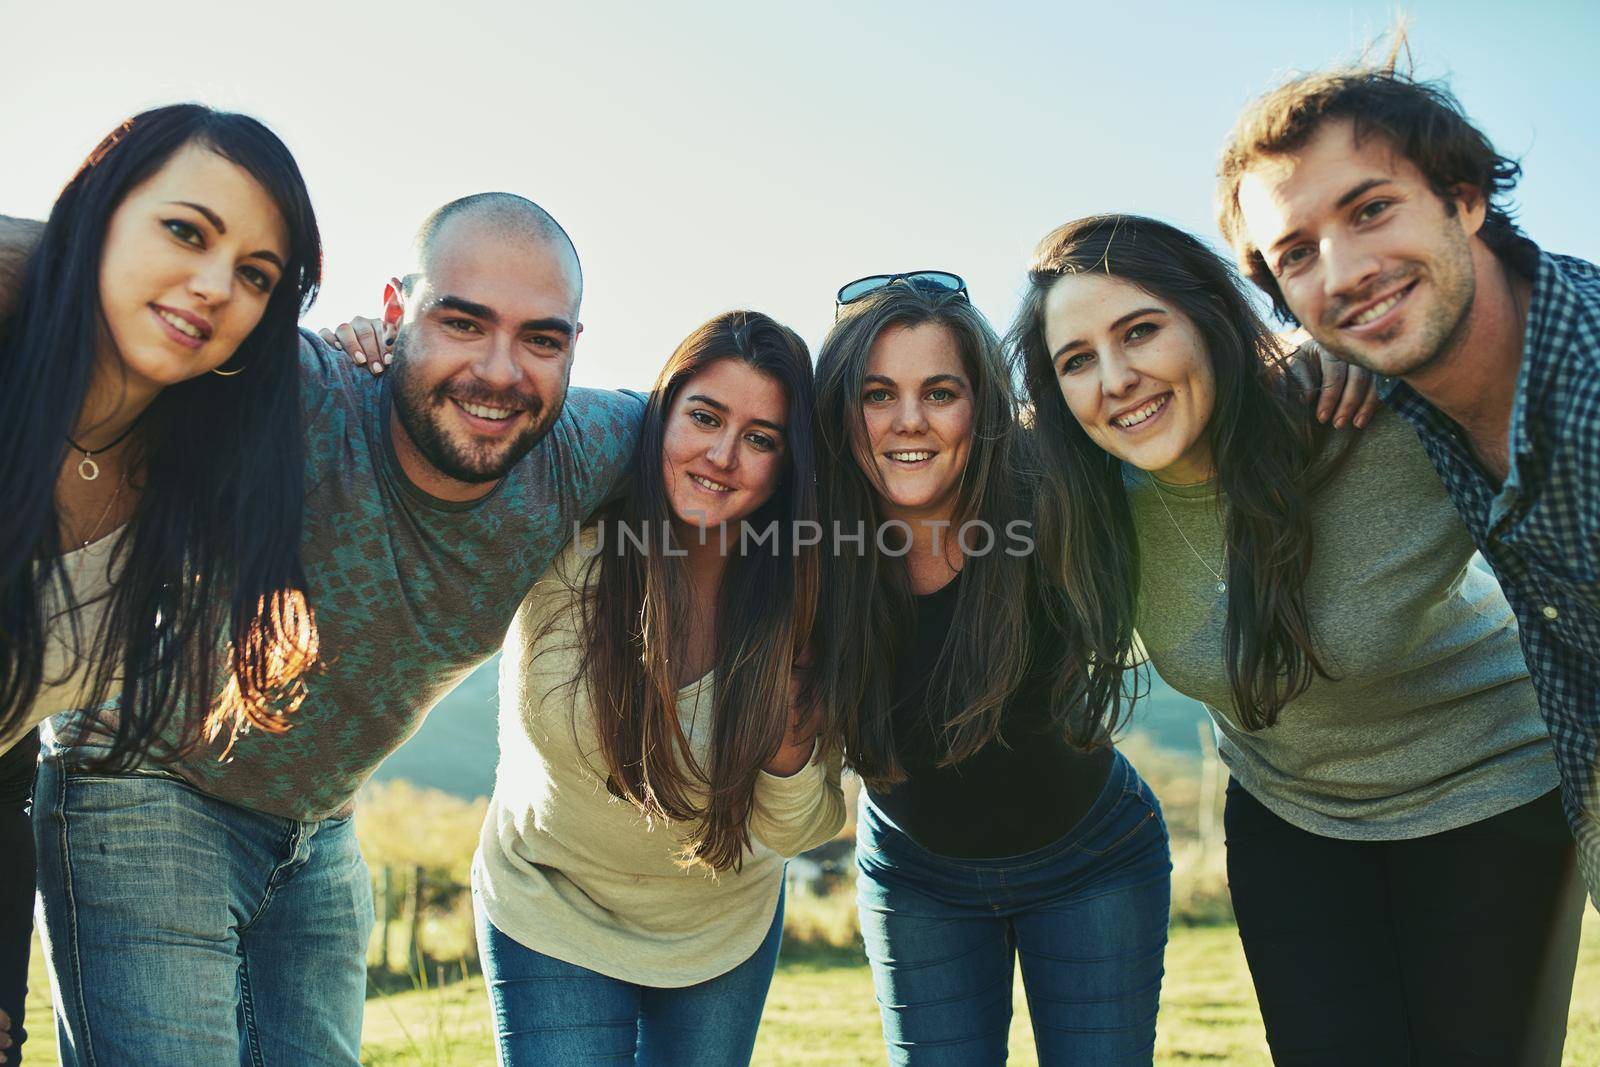 Portrait of a group of friends enjoying some time outdoors together.